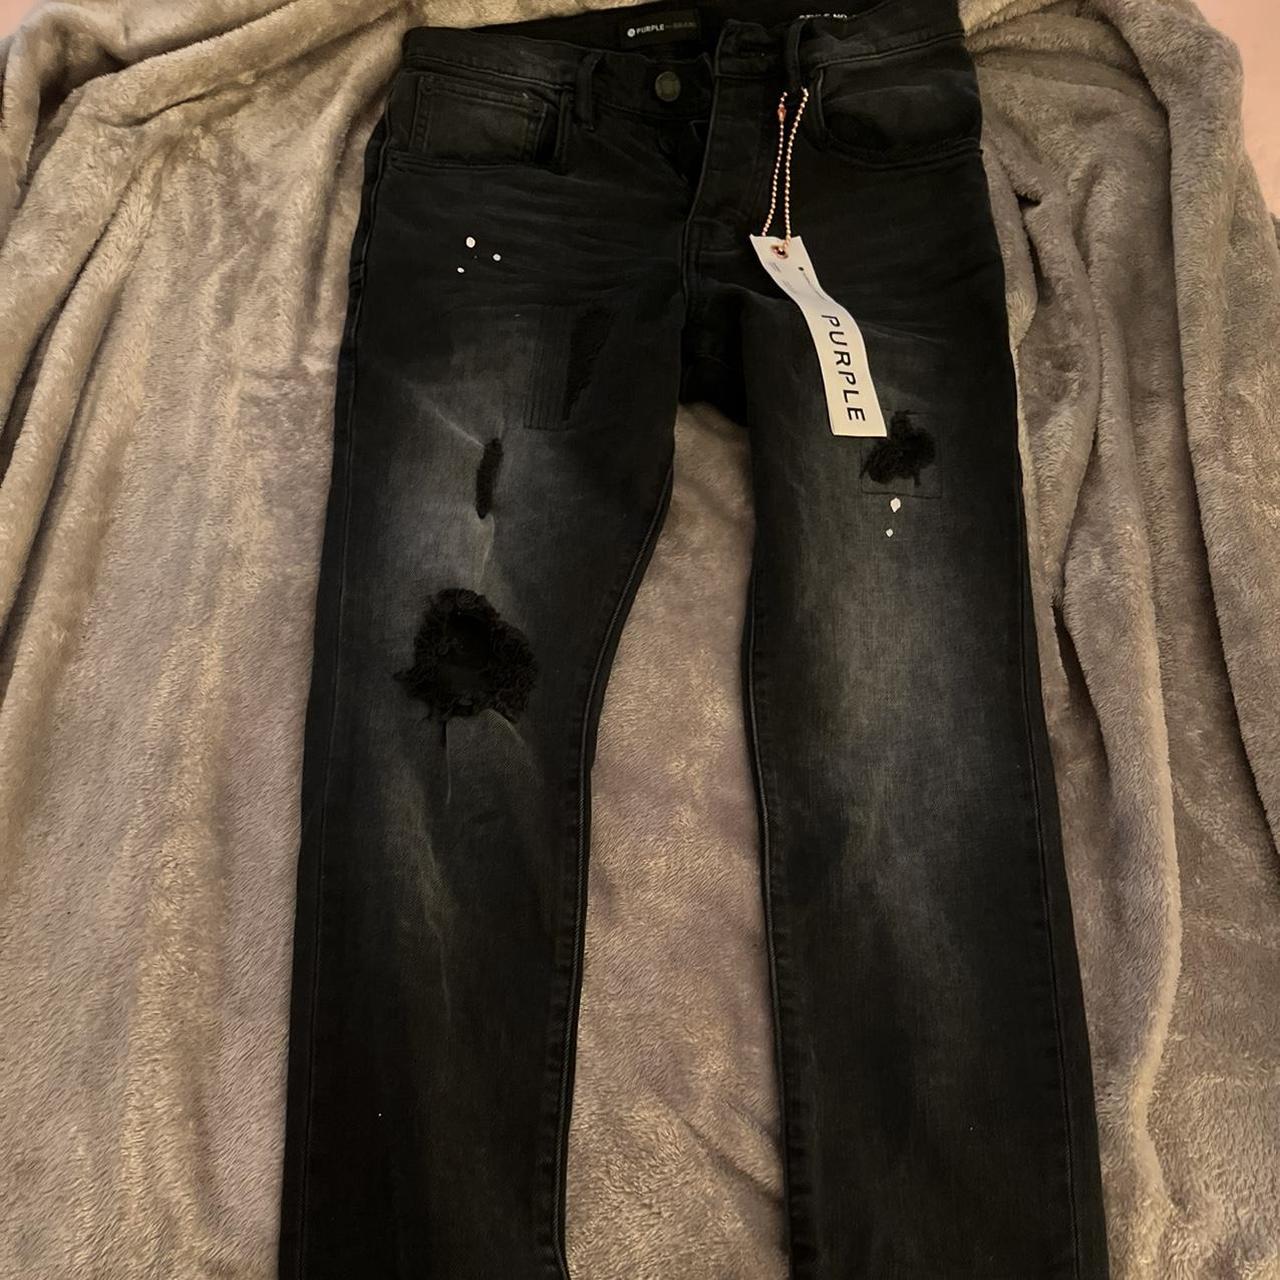 PURPLE BRAND P002 MID RISE SLIM JEANS Bought these - Depop